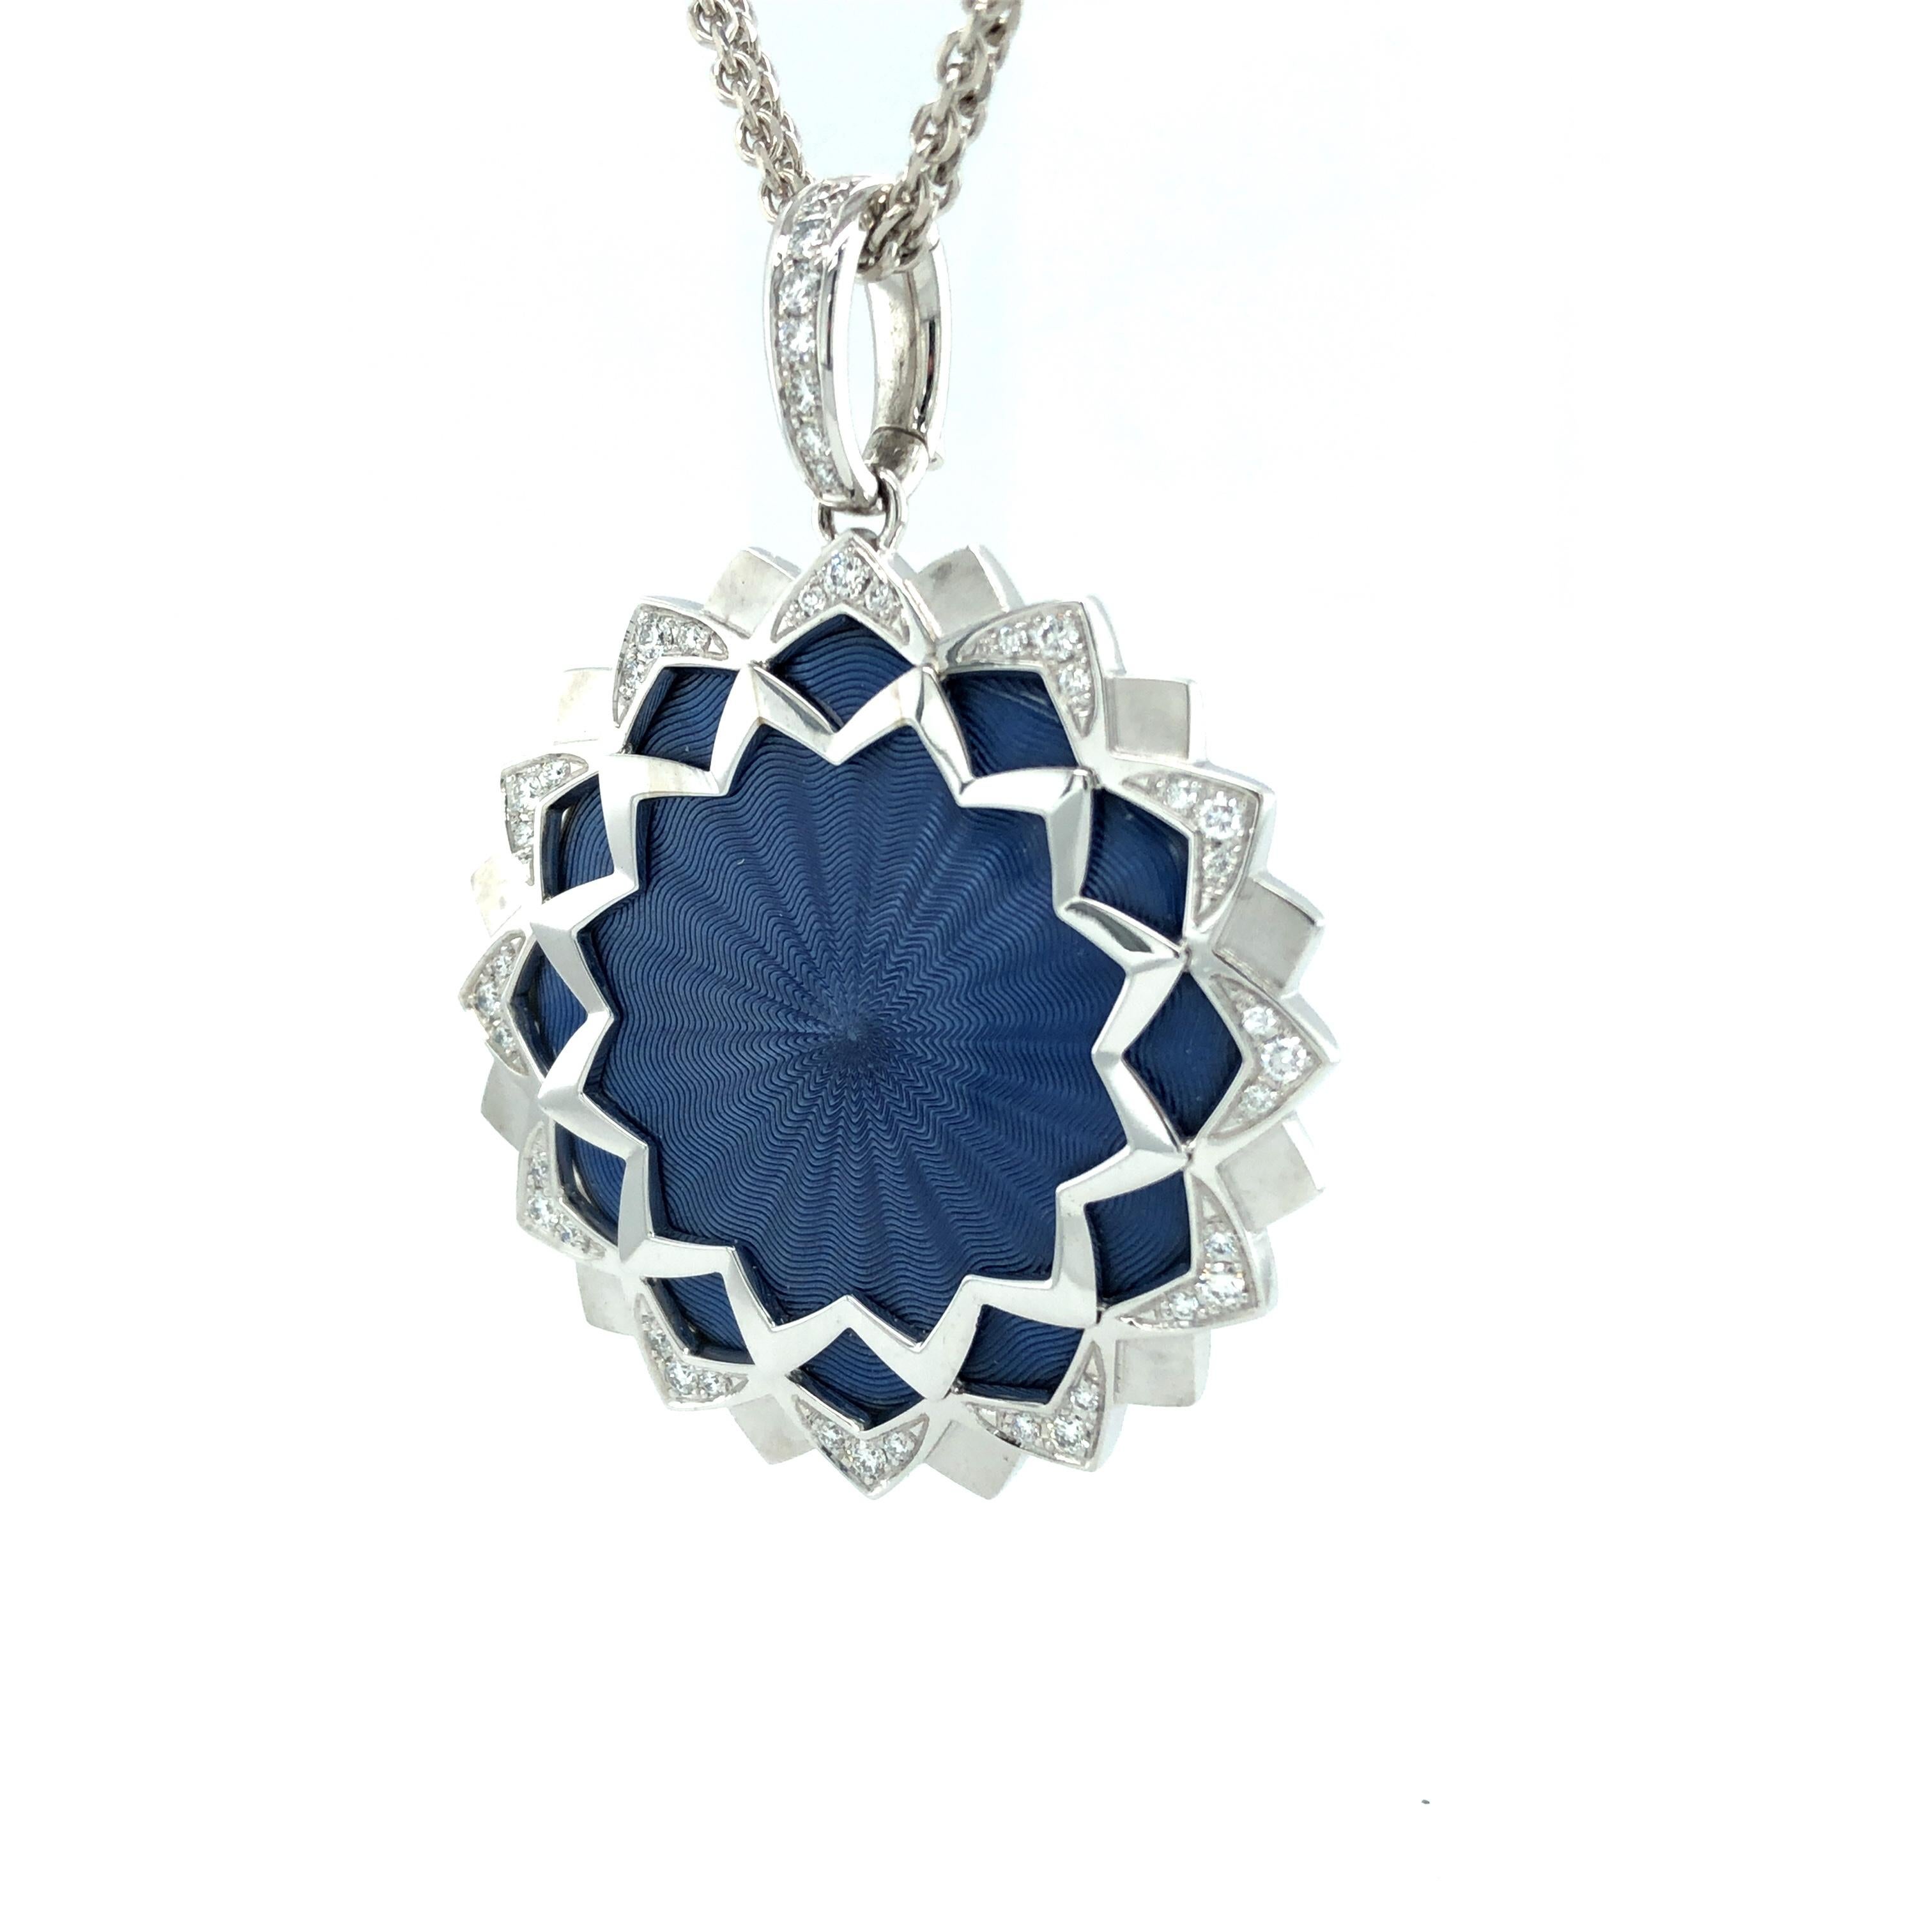 Victor Mayer round pendant 18k white gold, Chrysanthemum Collection, blue vitreous enamel, 43 diamonds, total 0.52 ct, G VS brilliant cut

About the creator Victor Mayer
Victor Mayer is internationally renowned for elegant timeless designs and